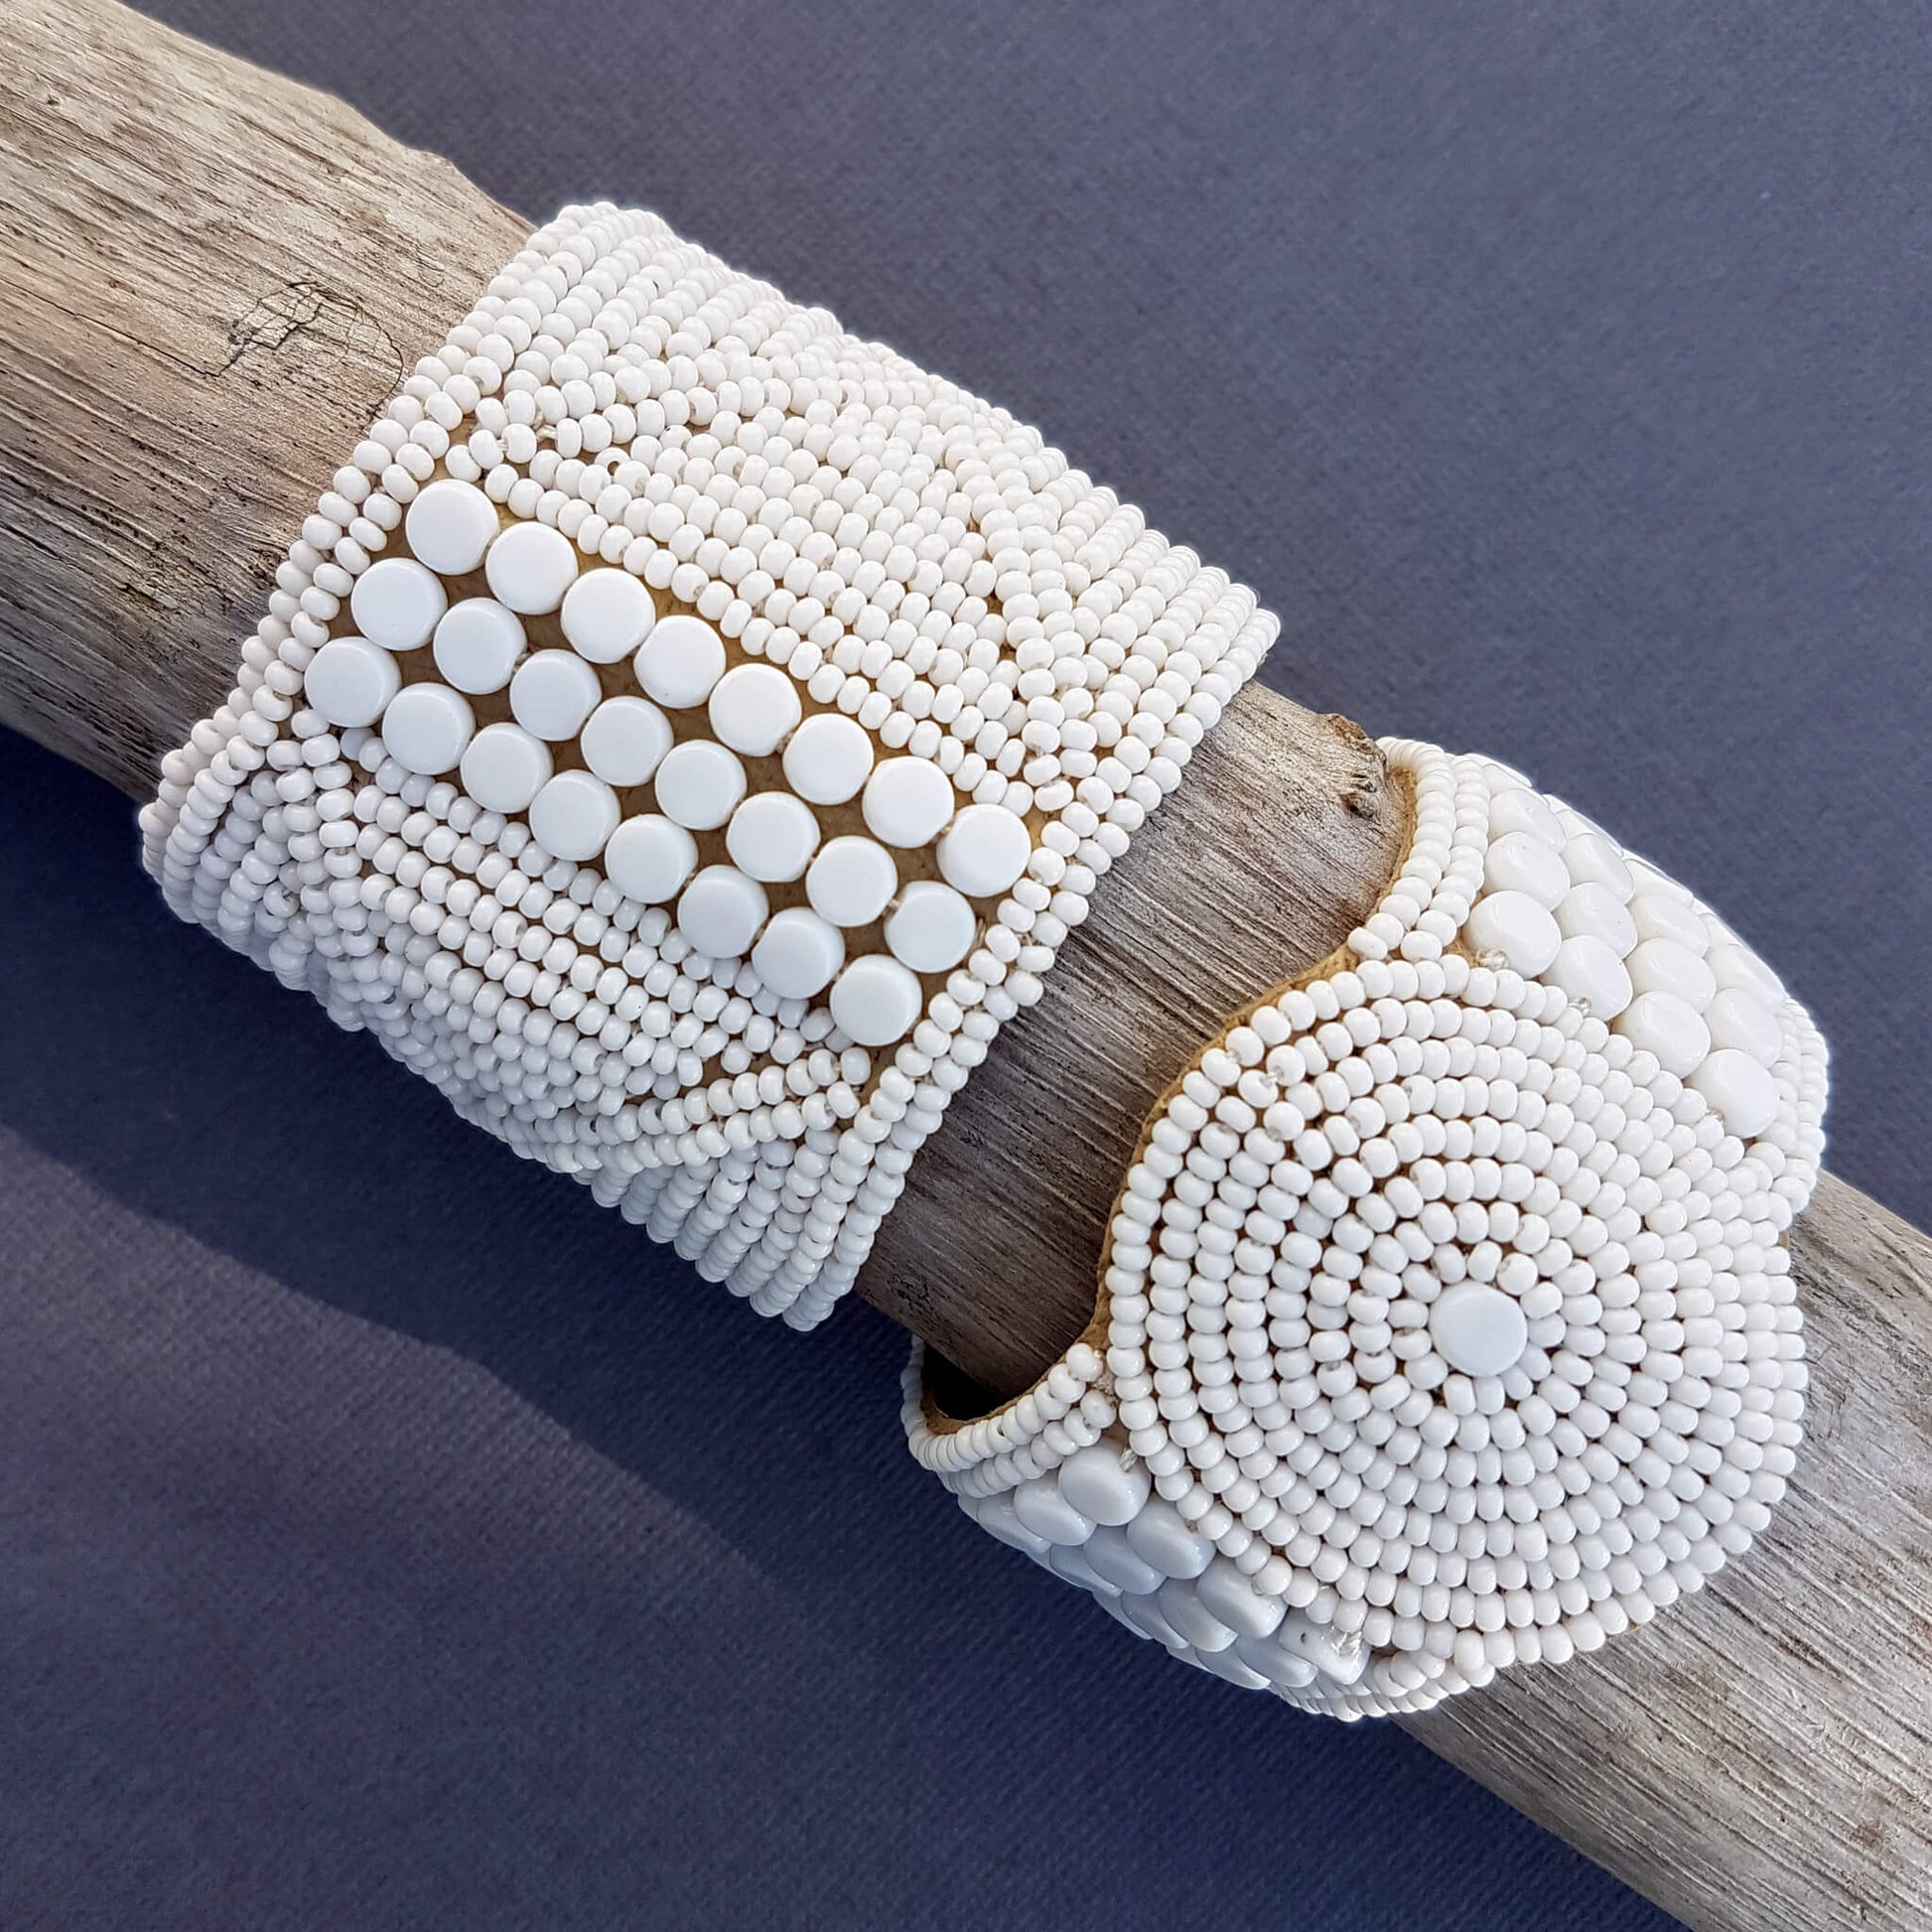 Sipolio Leather Bracelet Disk Handmade White - Unik by Nature